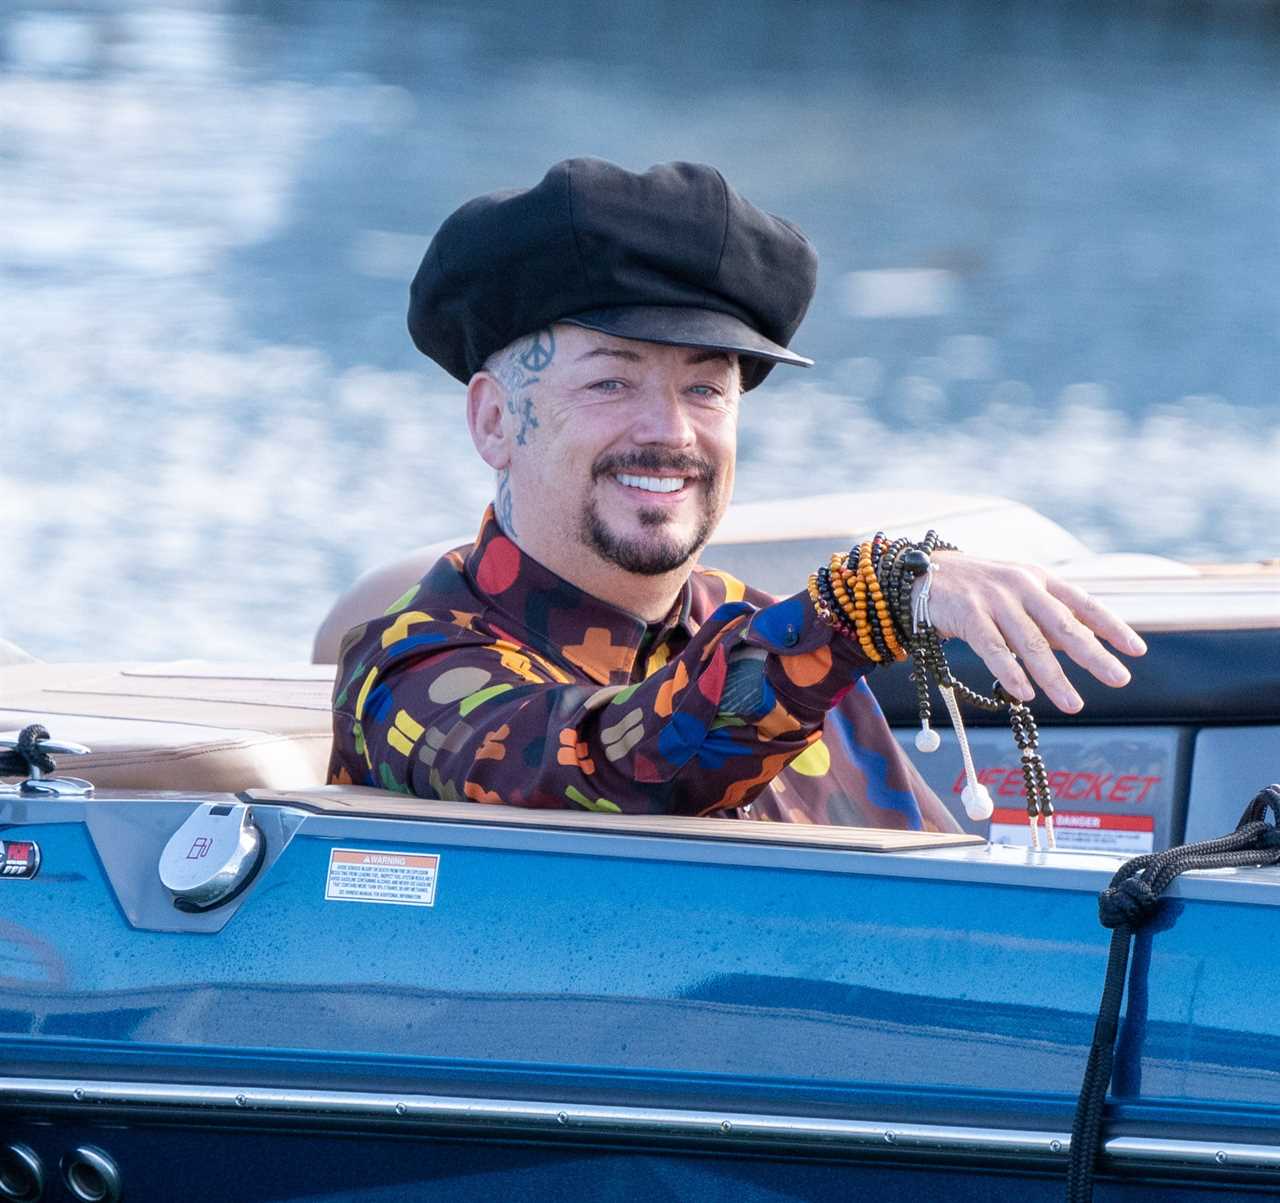 I’m A Celeb’s Boy George and co-stars all smiles as they sail onto the show – not realising horrors that await them